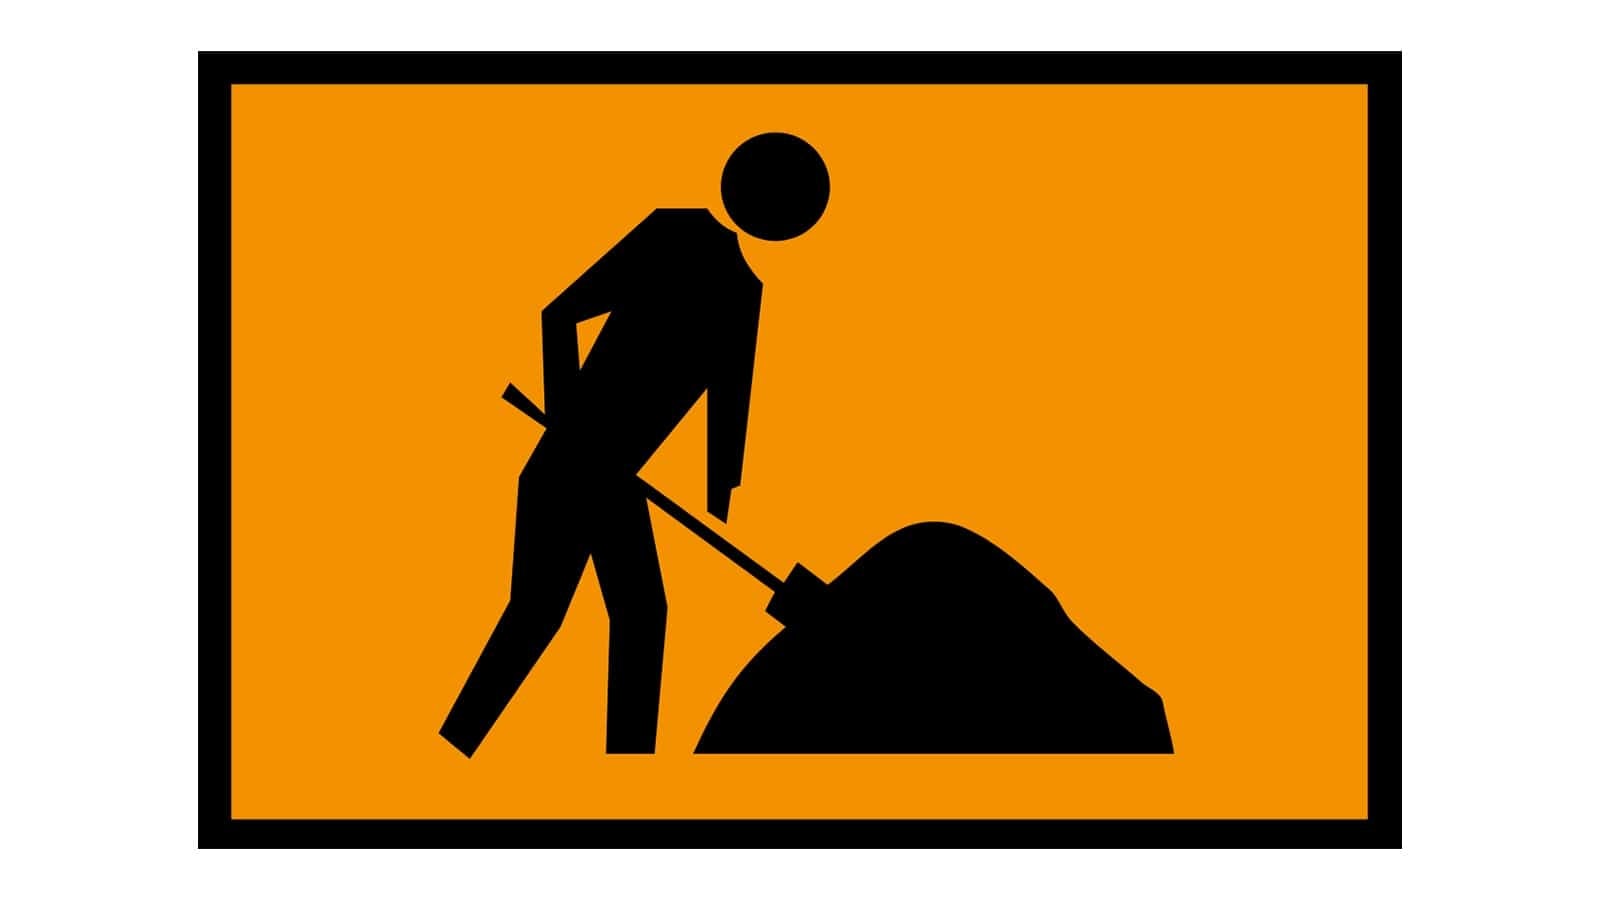 Workers Ahead Road Sign